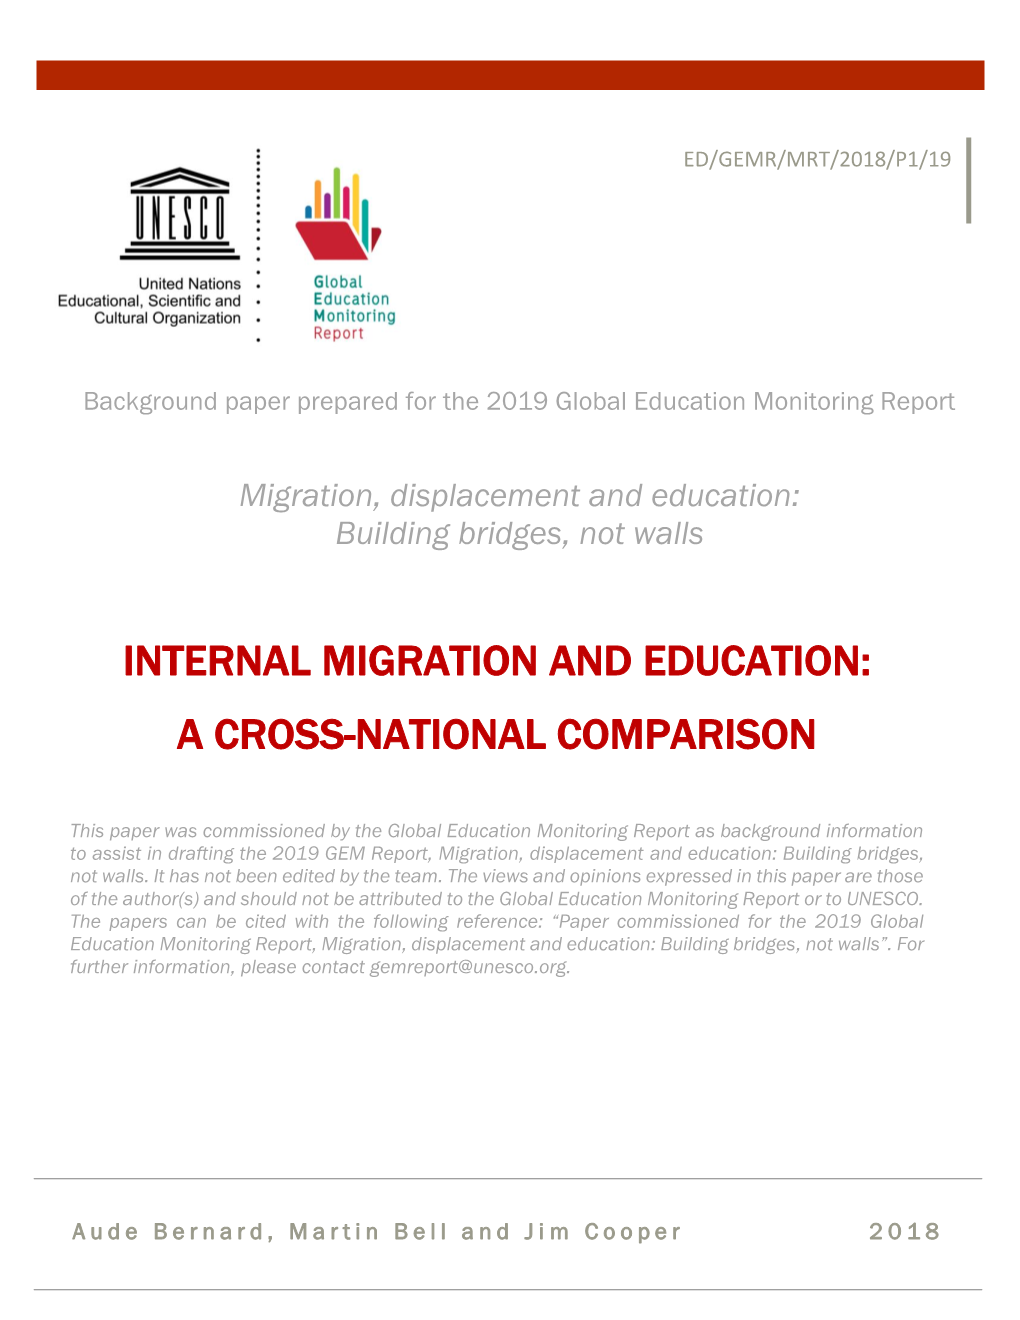 Internal Migration and Education: a Cross-National Comparison